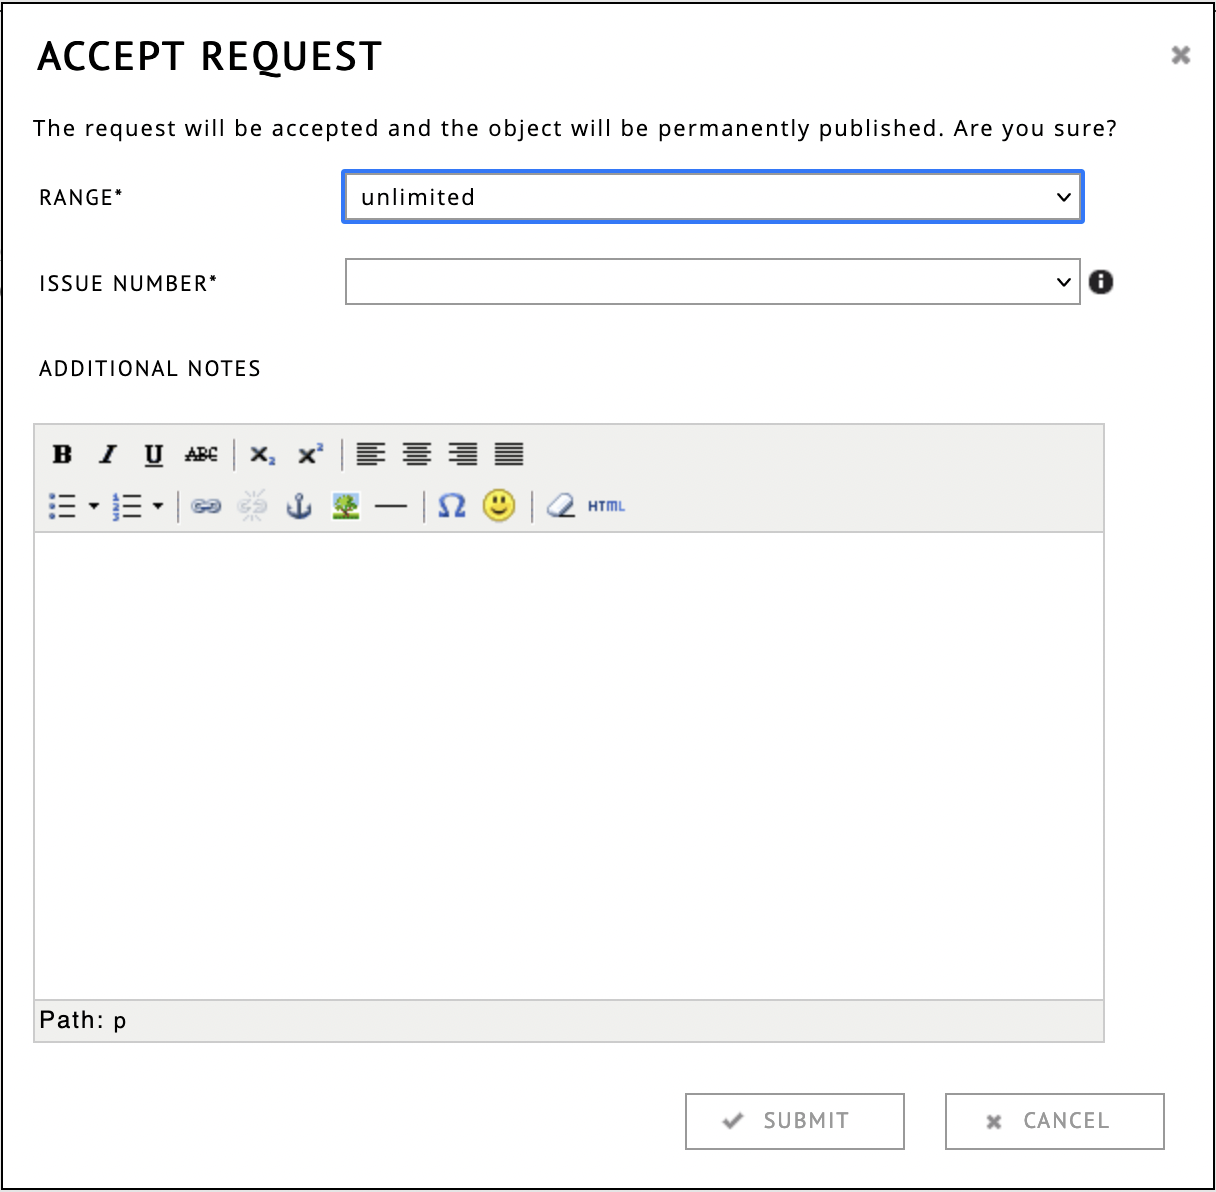 Dialog for accepting the publication request